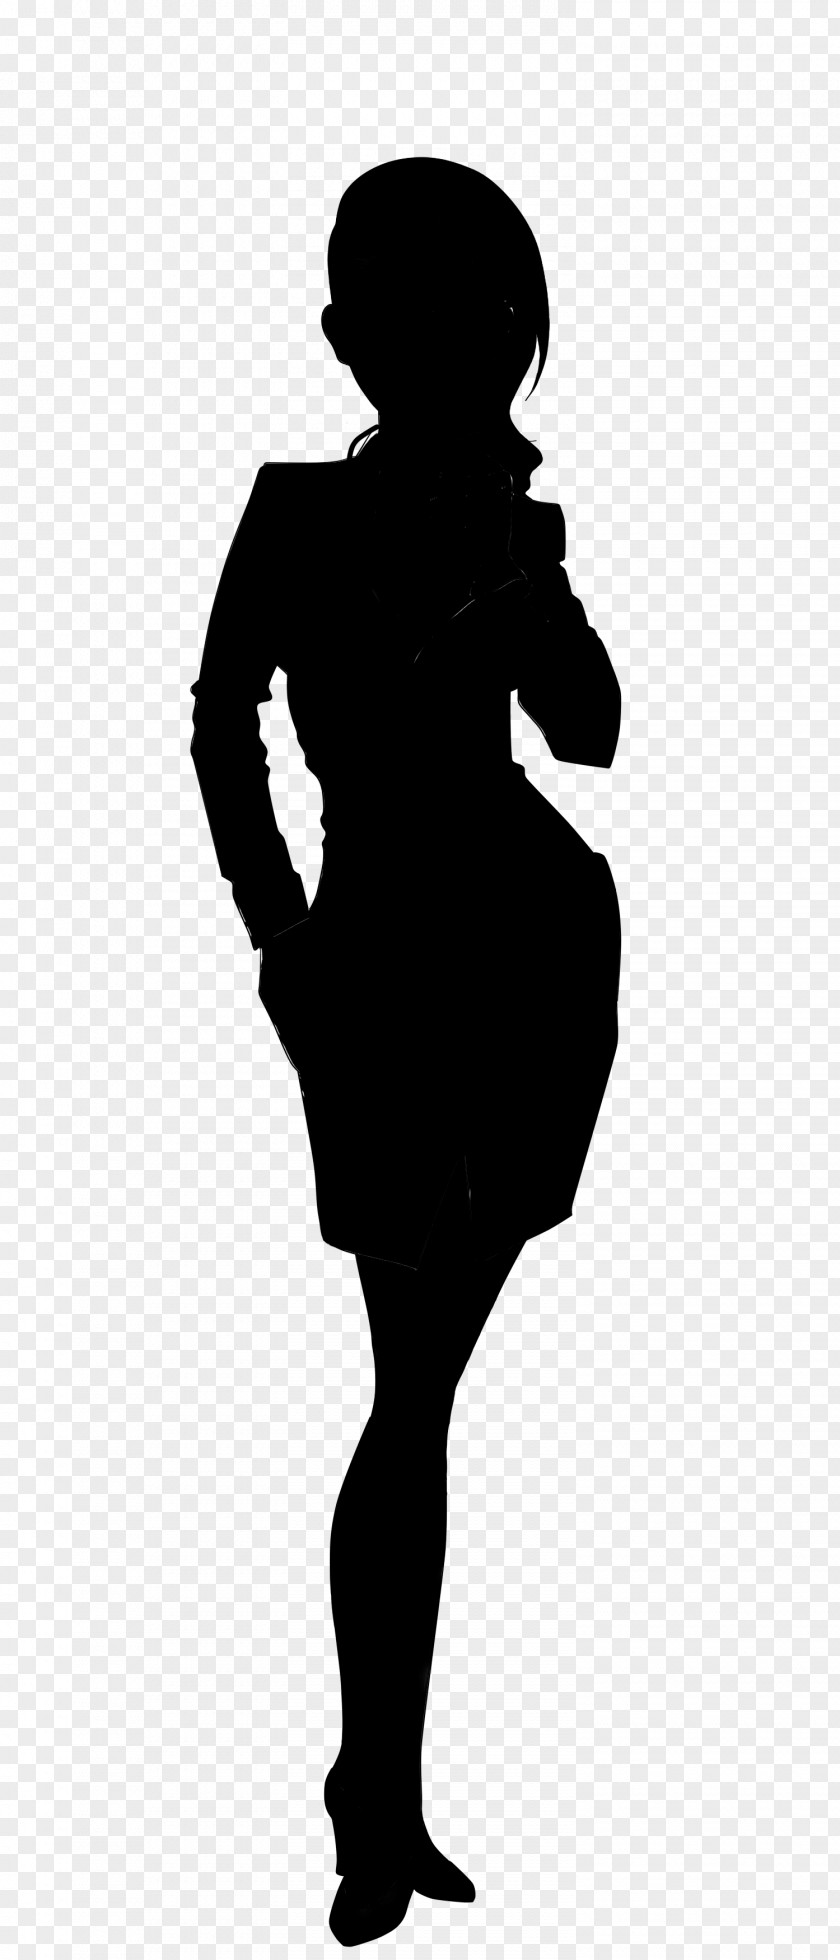 Silhouette Stock Photography Image Vector Graphics PNG